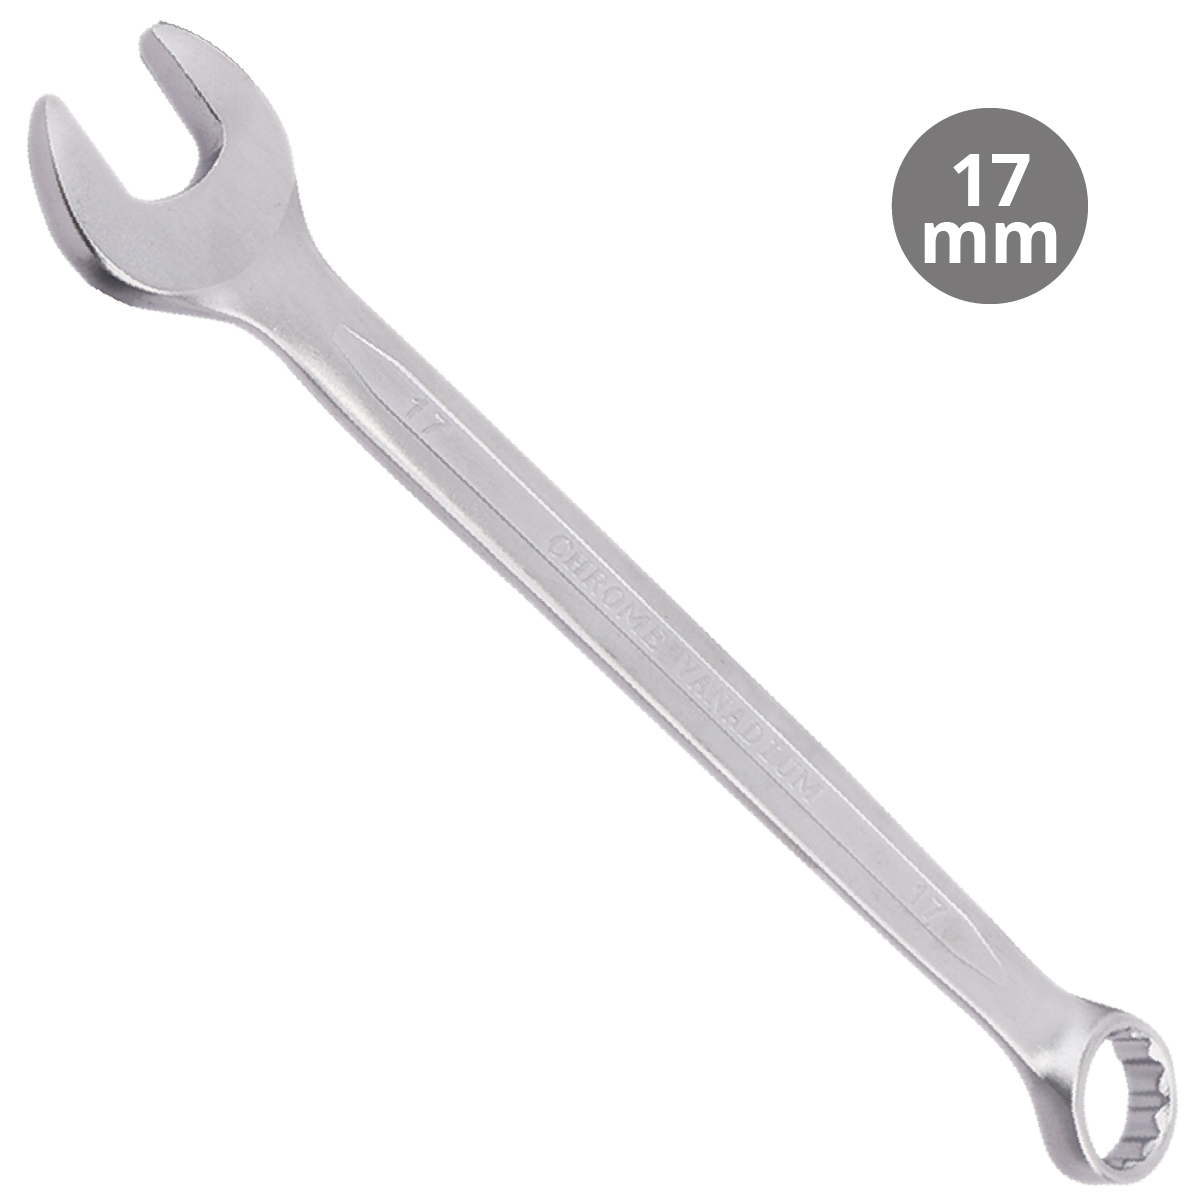 Combination wrench CR-V 17mm